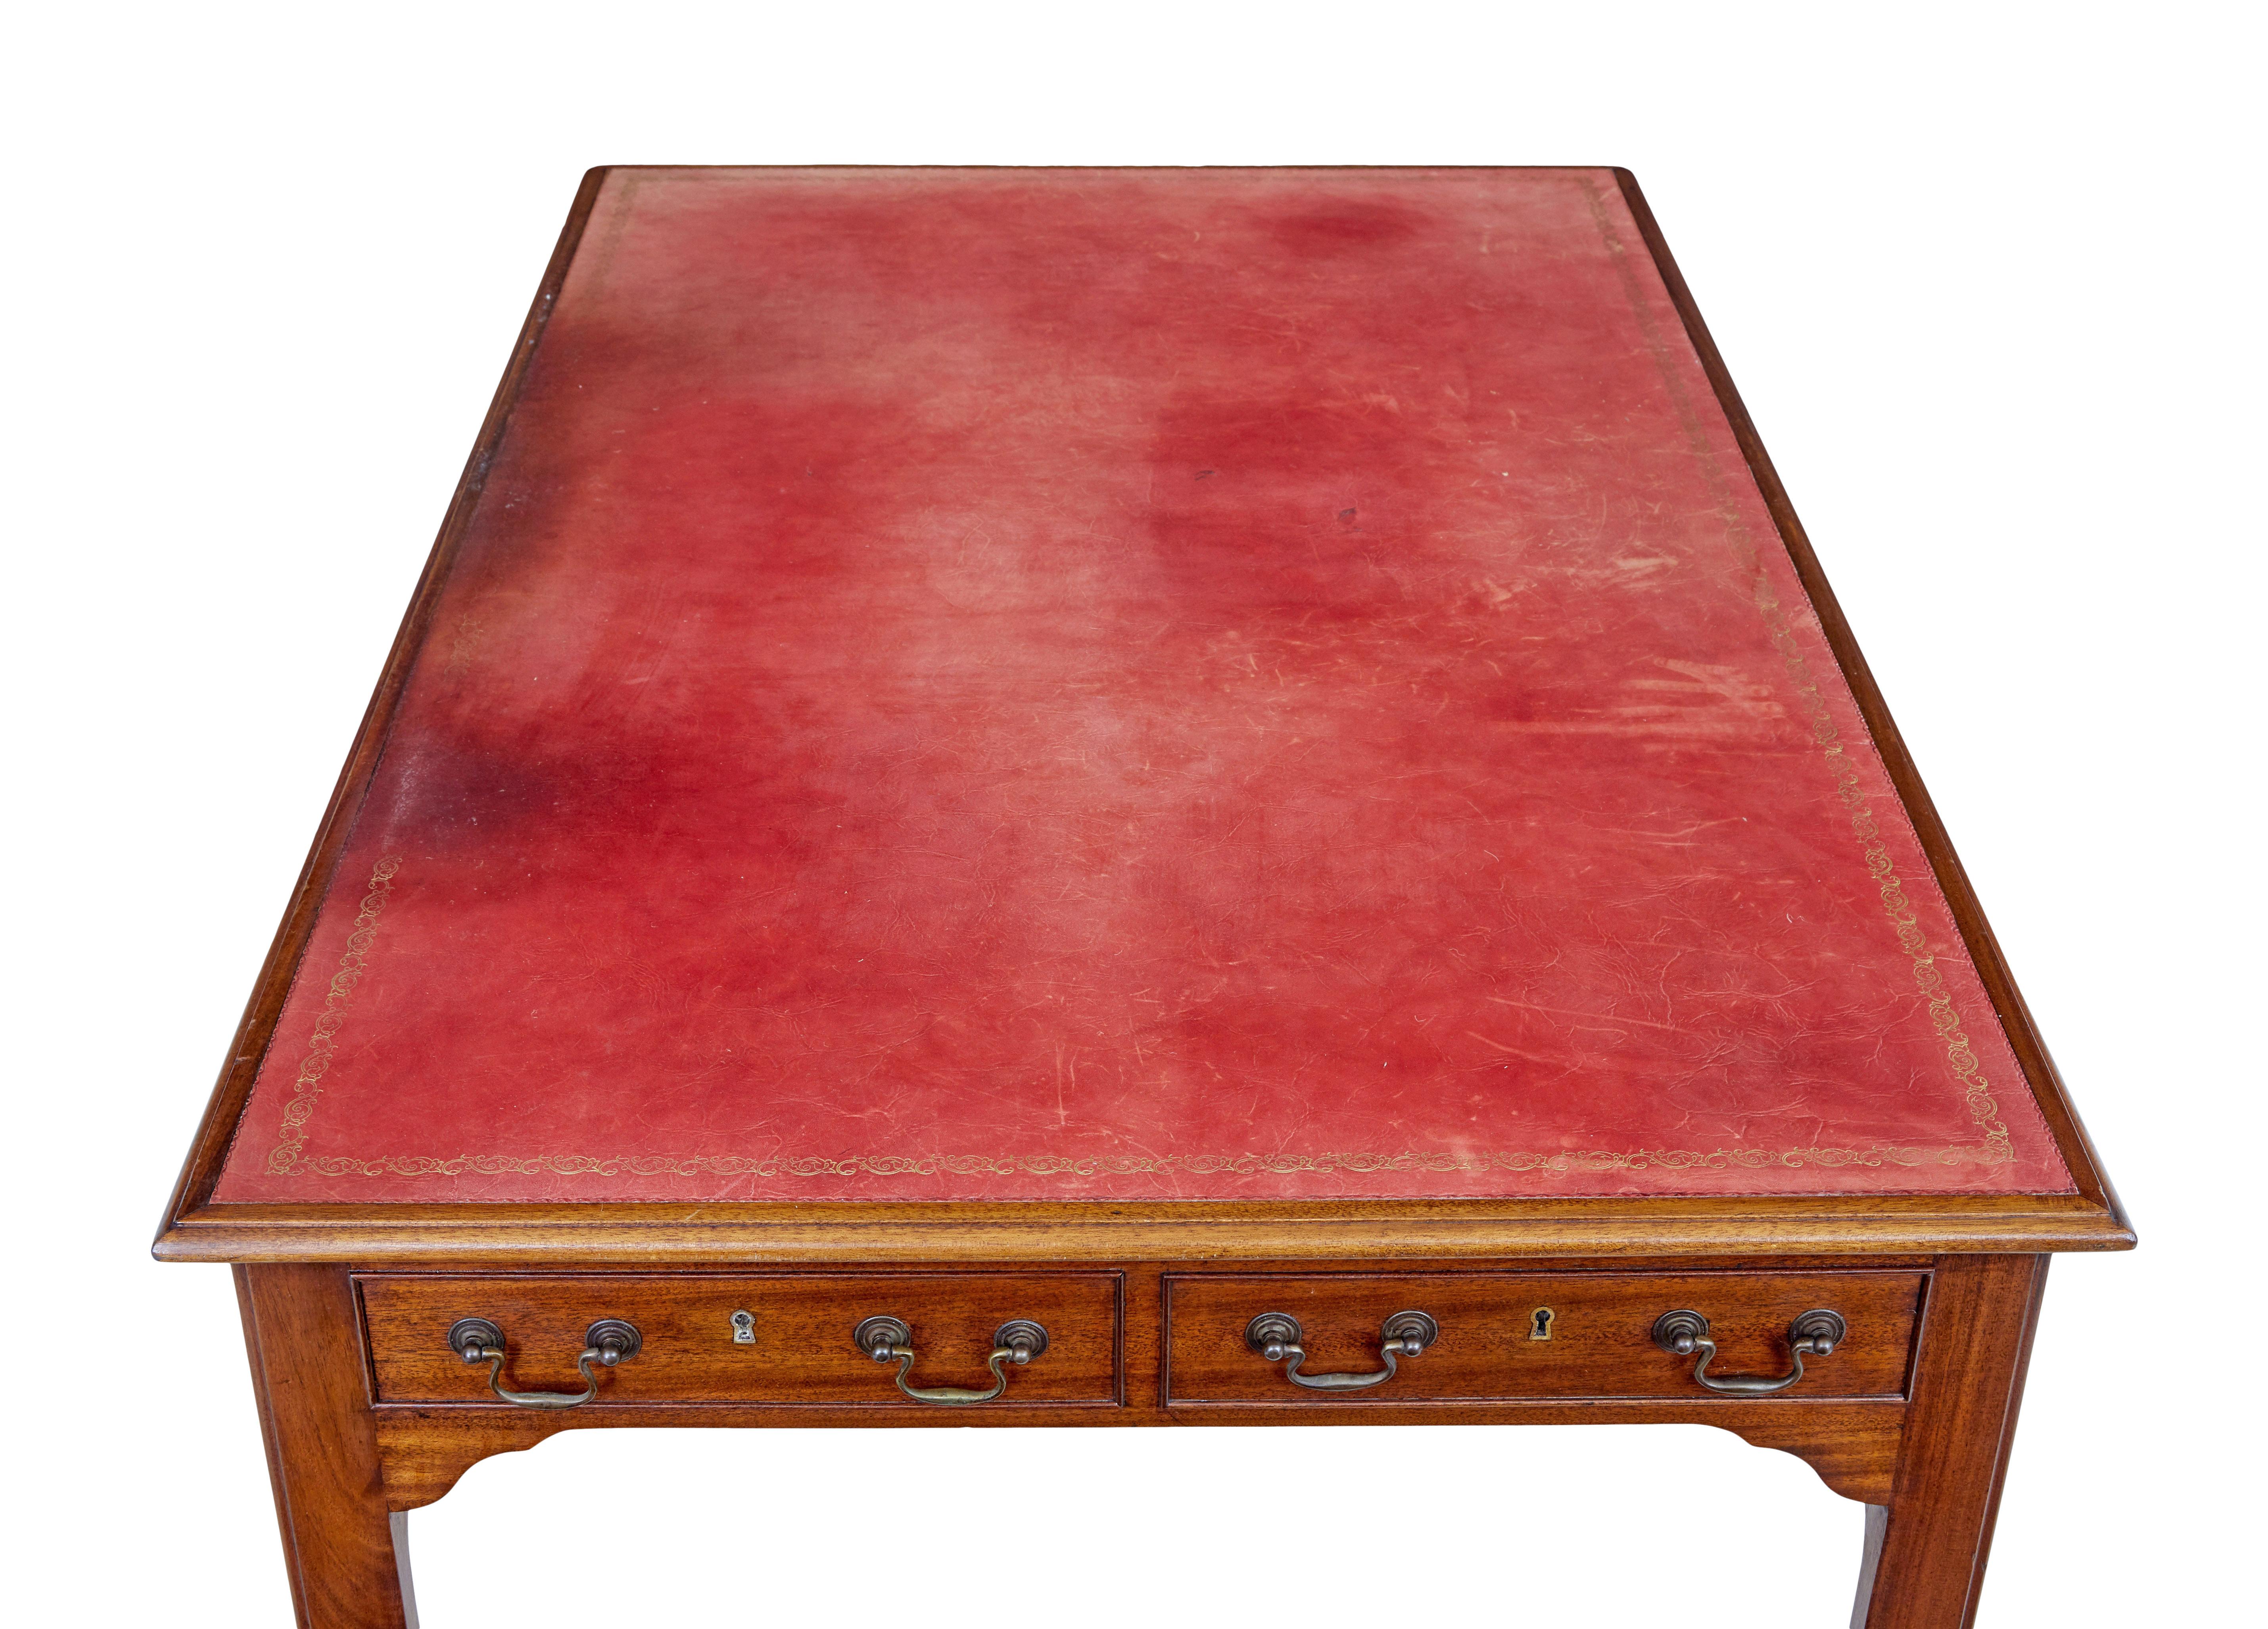 Early 20th century leather top mahogany desk circa 1910.

Original red leather writing surface with gold tooling, with obvious signs of use.  Fitted with 3 drawers above the the knee for storage, desk is fitted with dummy drawers on the back and